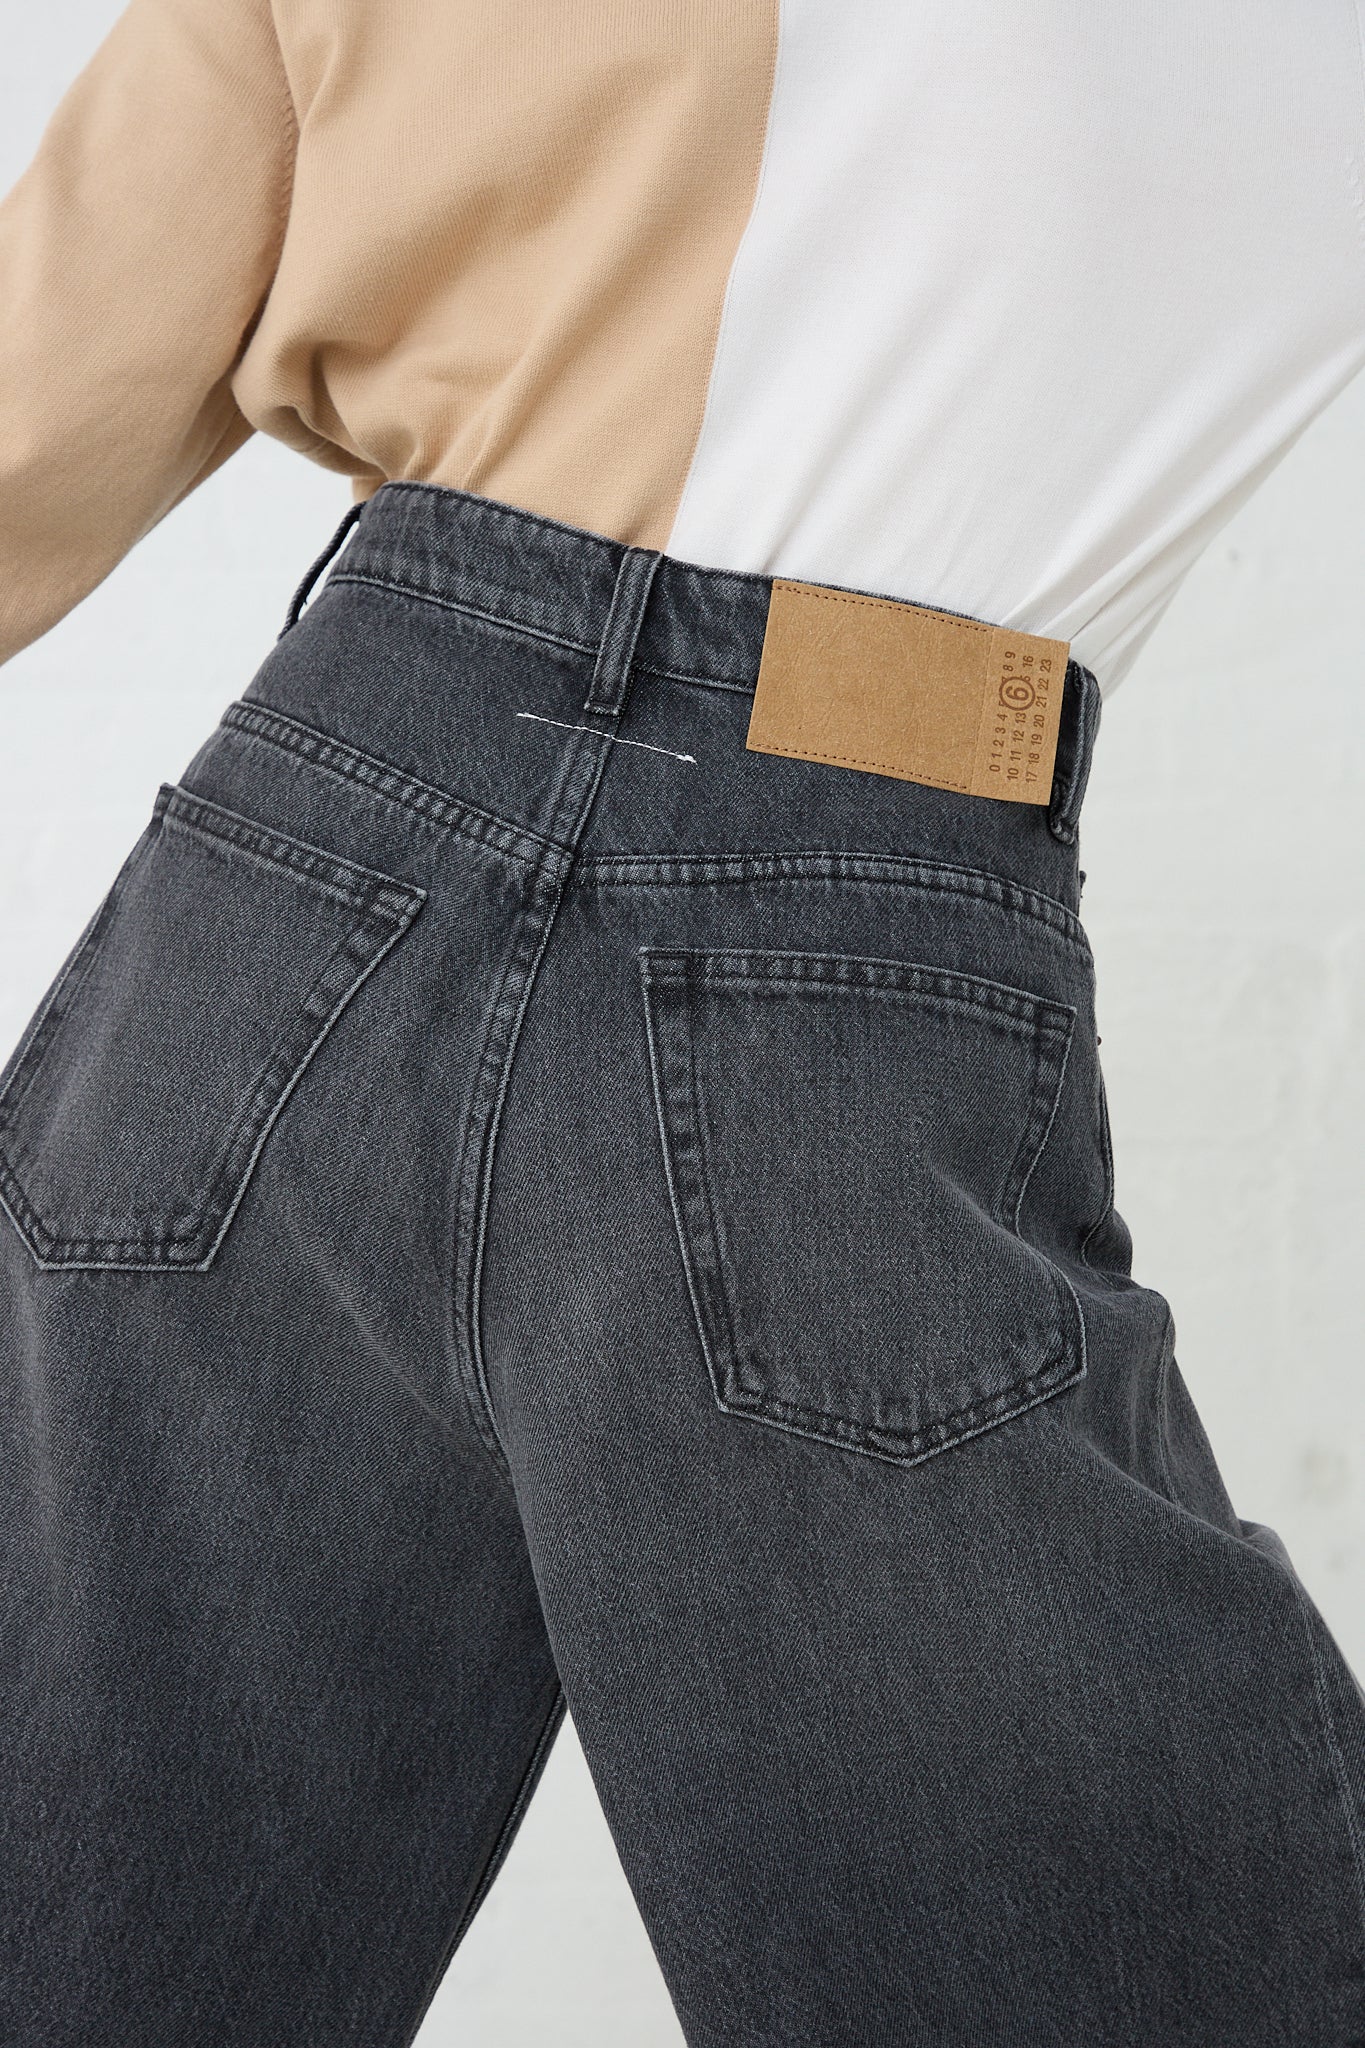 The back of a woman's MM6 gray denim jeans with 5 Pockets Pant in Grey. Up close view of back pocket details.